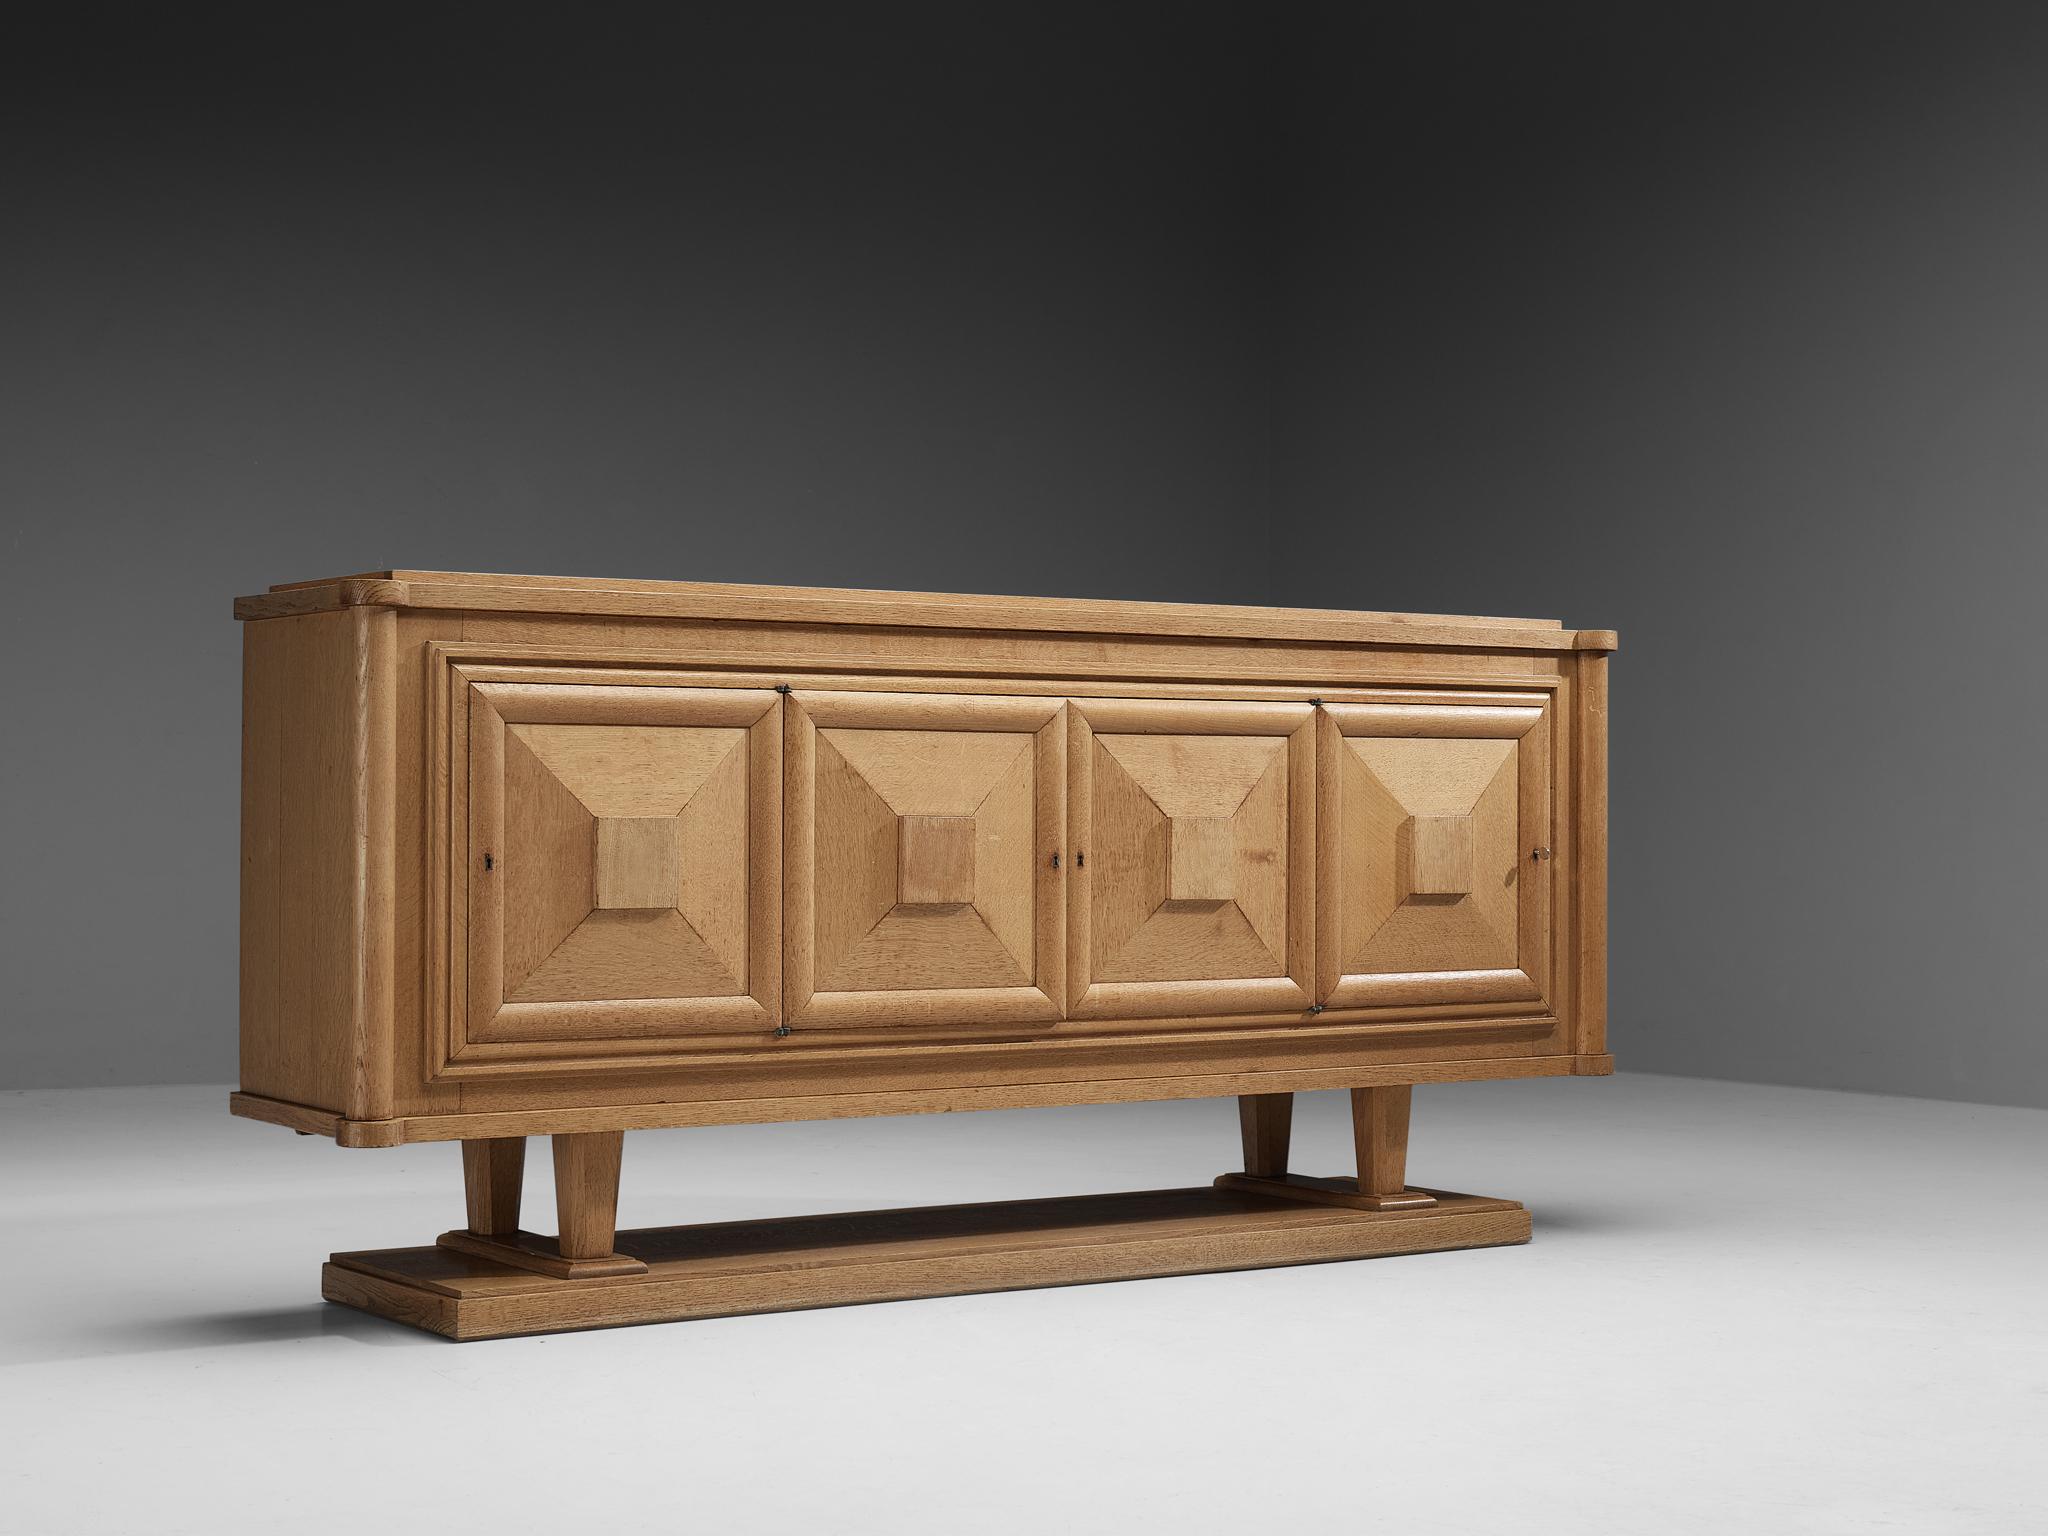 Sideboard, oak, France 1930s.

Large Art Deco credenza in oak. The sideboard has four doors, all with beautifully designed wooden graphical patterns. The diagonal lines with added squares and a frame emphasize the three-dimensional character of